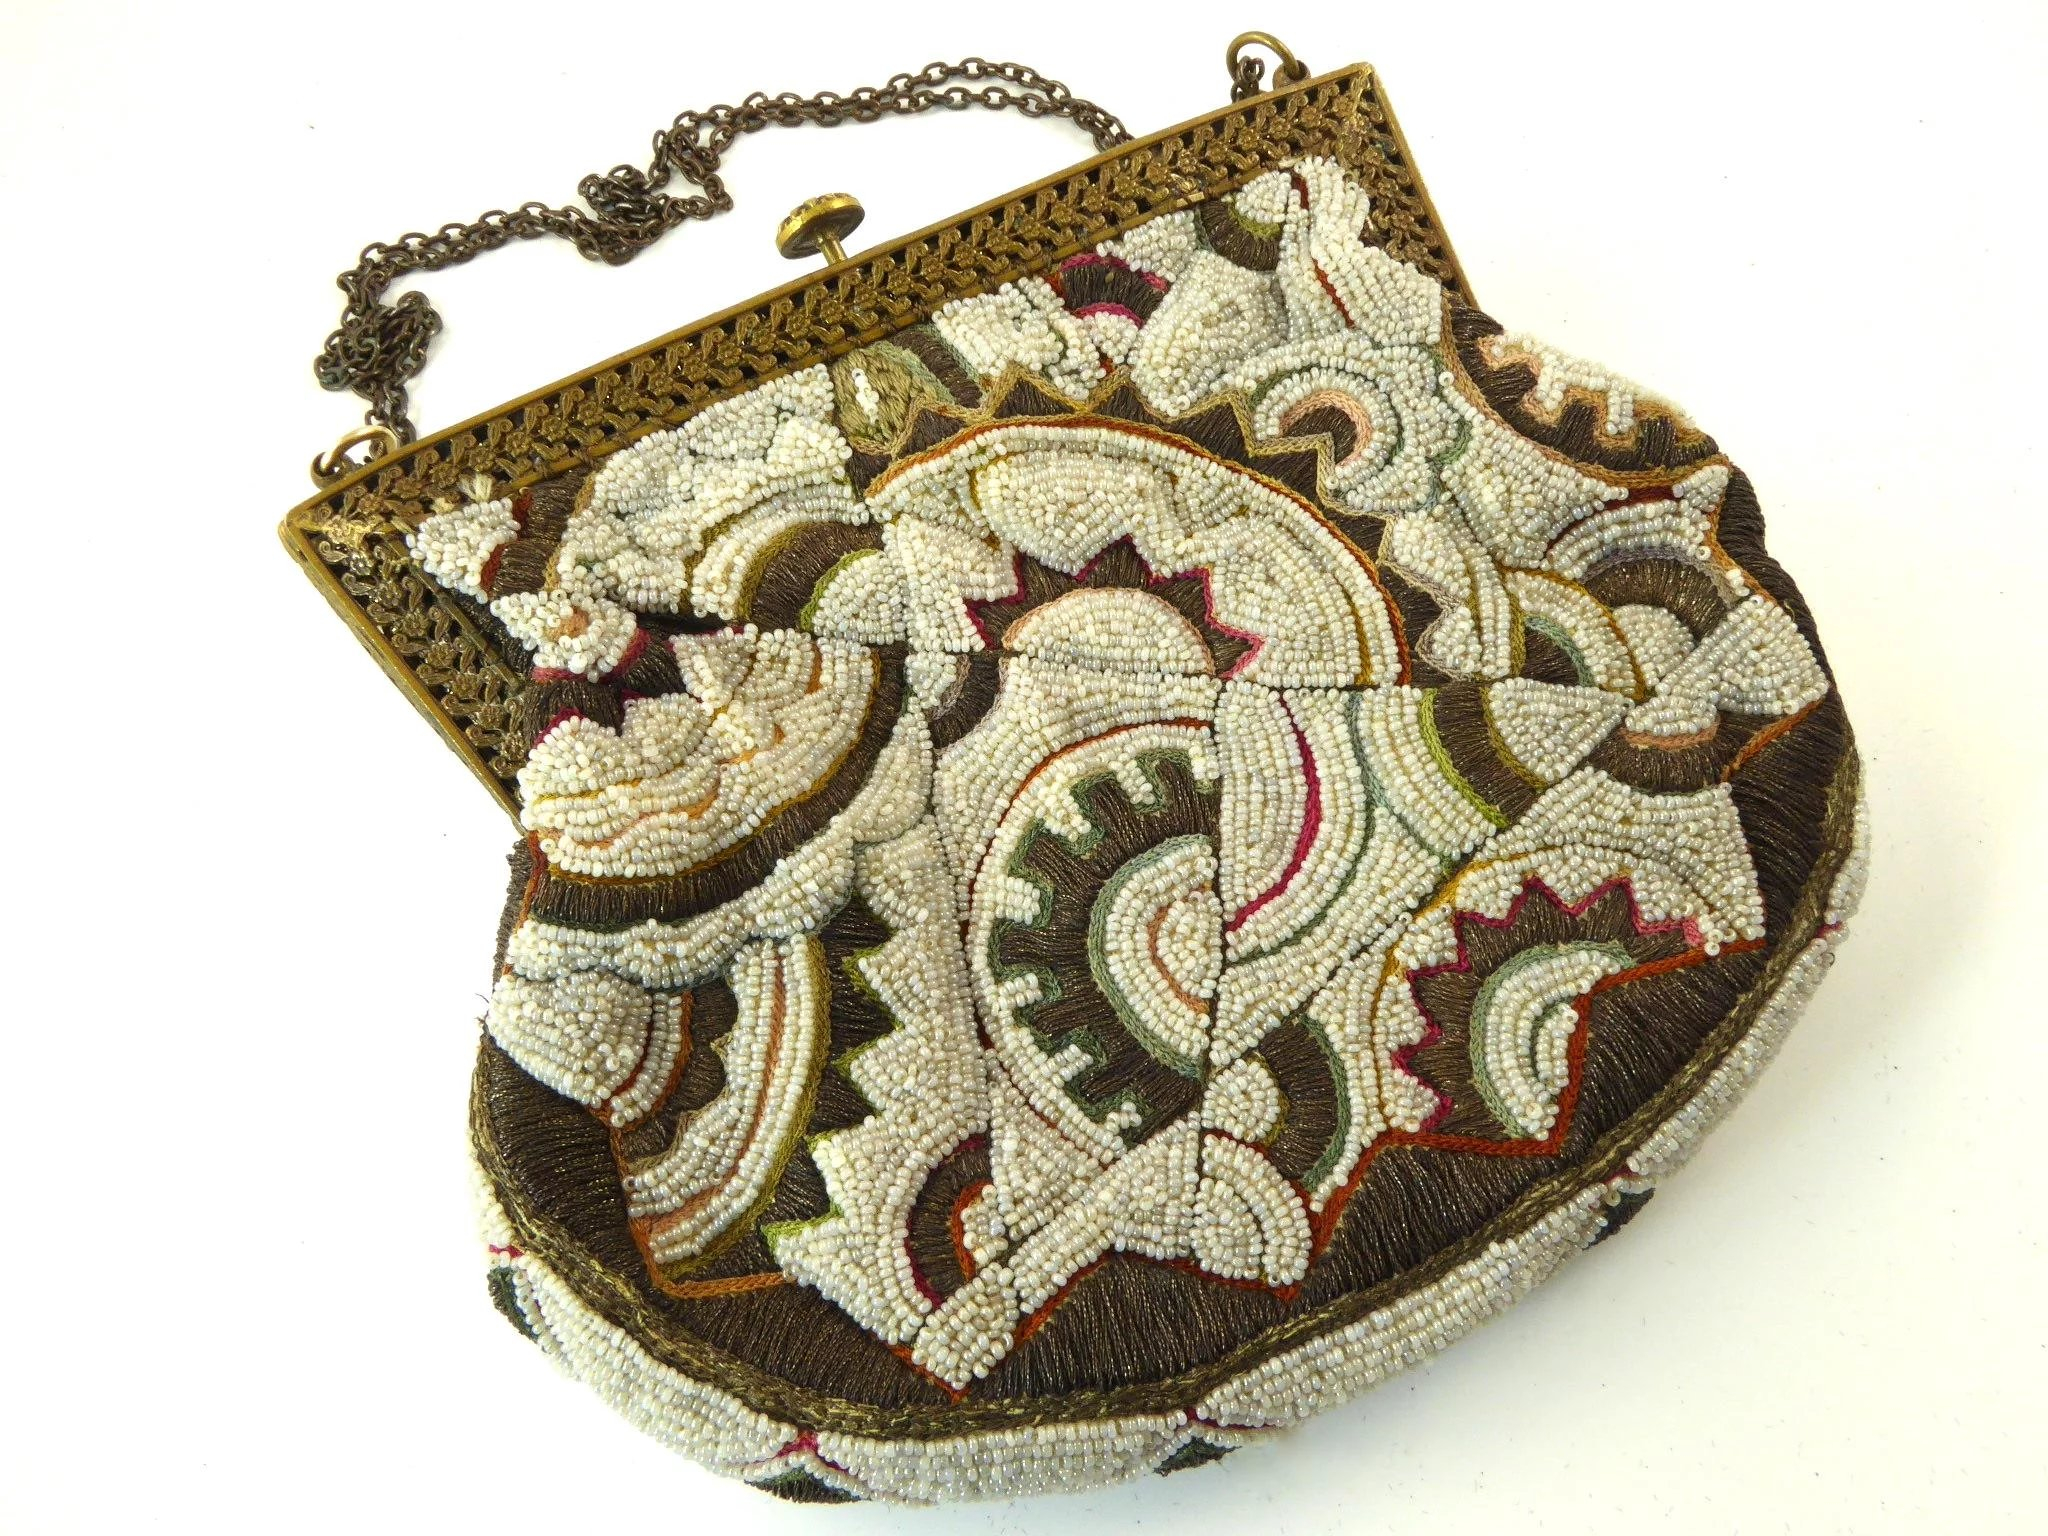 Art Deco Embroidery Patterns Extraordinary French Art Deco Beaded And Metallic Embroidery Purse